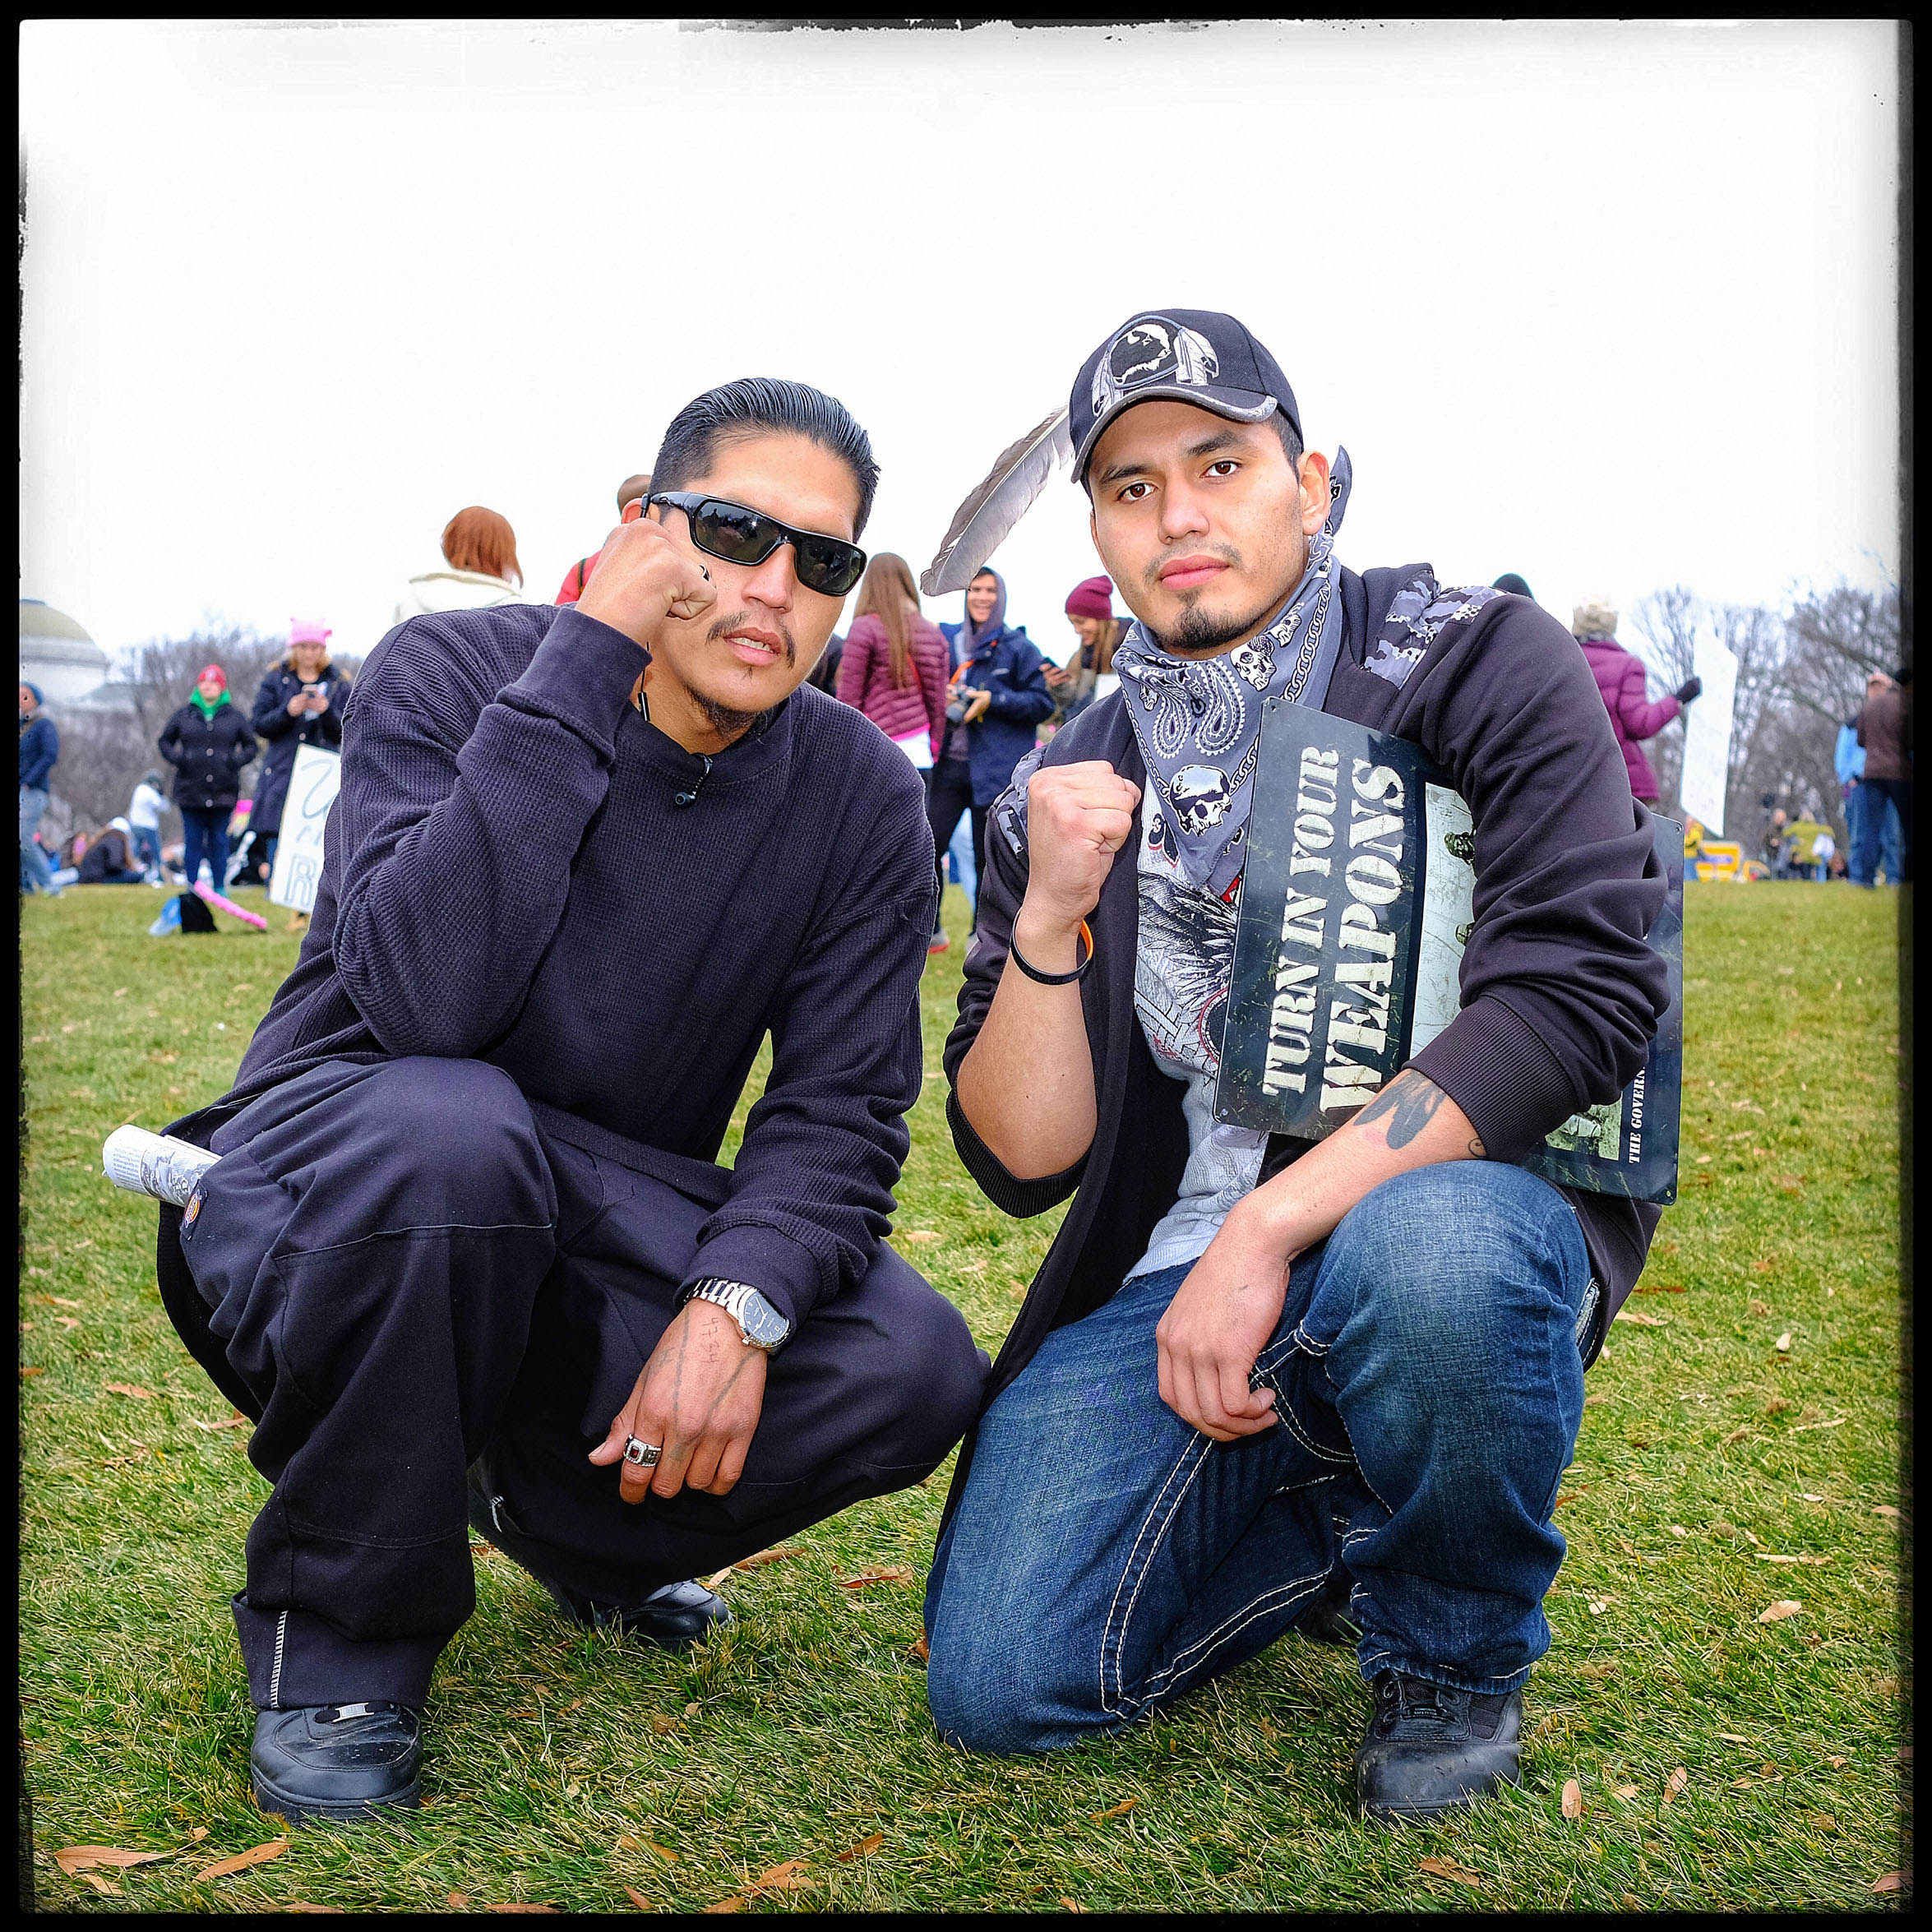 Madmax, right, 22 from New York City, with Chaske, 29, from Minneapolis. Both came to Washington to shed light on the situation in Standing Rock:  People like me are being arrested and charged for felonies that we don't deserve. I was charged for two felonies, reckless endangerment and criminal mischief,  Madmax told me. Chaske added:  I came to support 'Sioux Z Dezbah' [a water protector who was injured in one eye] and all that she is doing to highlight our plight. I am here to support the women and to watch their backs.